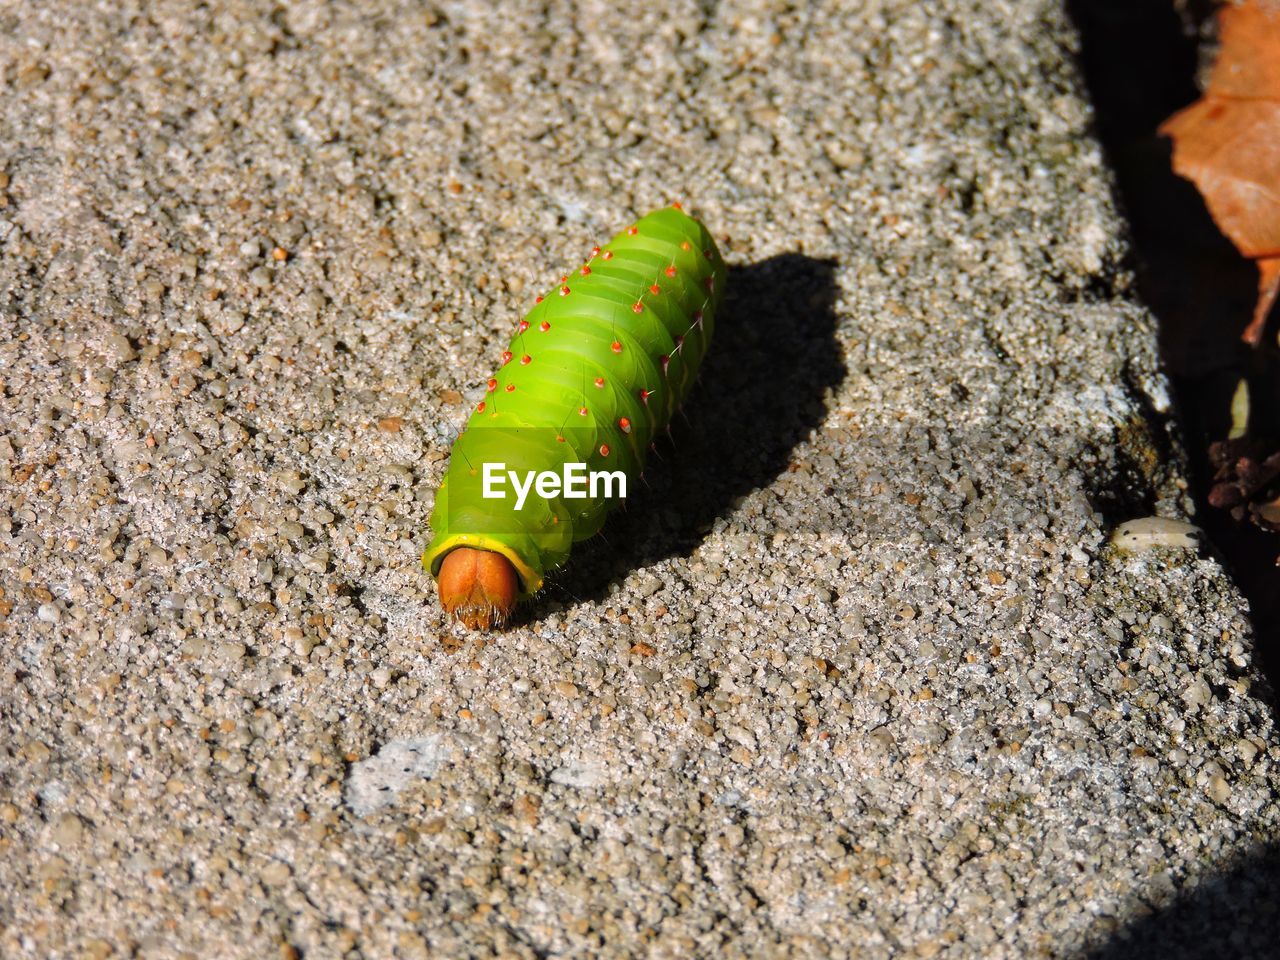 insect, caterpillar, soil, green, macro photography, animal, nature, no people, leaf, day, sunlight, high angle view, land, animal wildlife, moths and butterflies, close-up, animal themes, wildlife, yellow, one animal, outdoors, larva, shadow, sand, beach